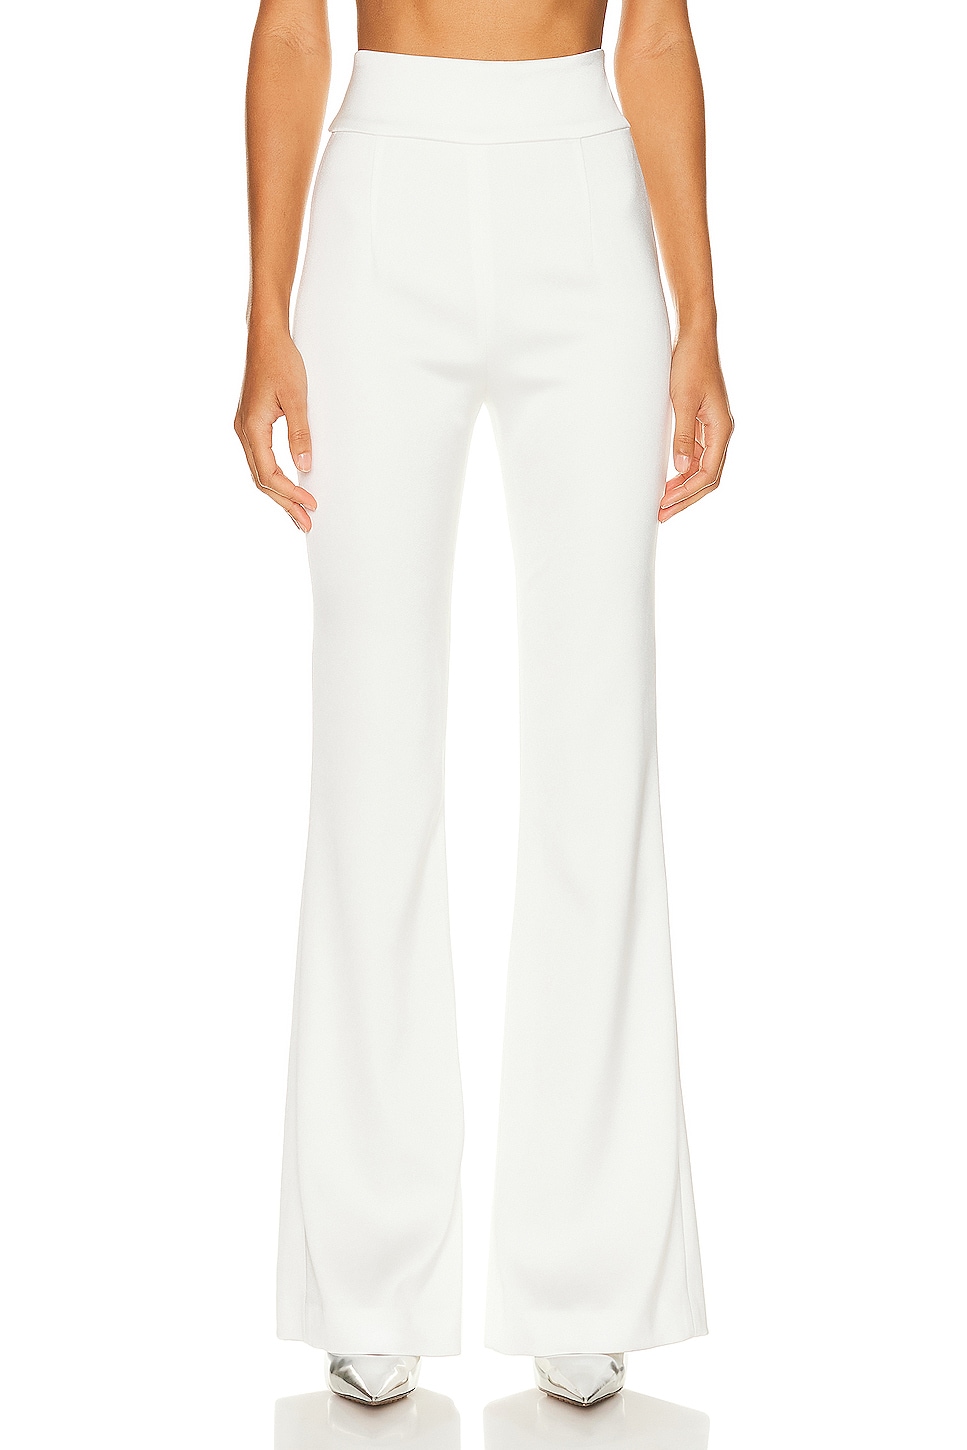 Image 1 of GALVAN Sculpted Bridal Trouser in Off White